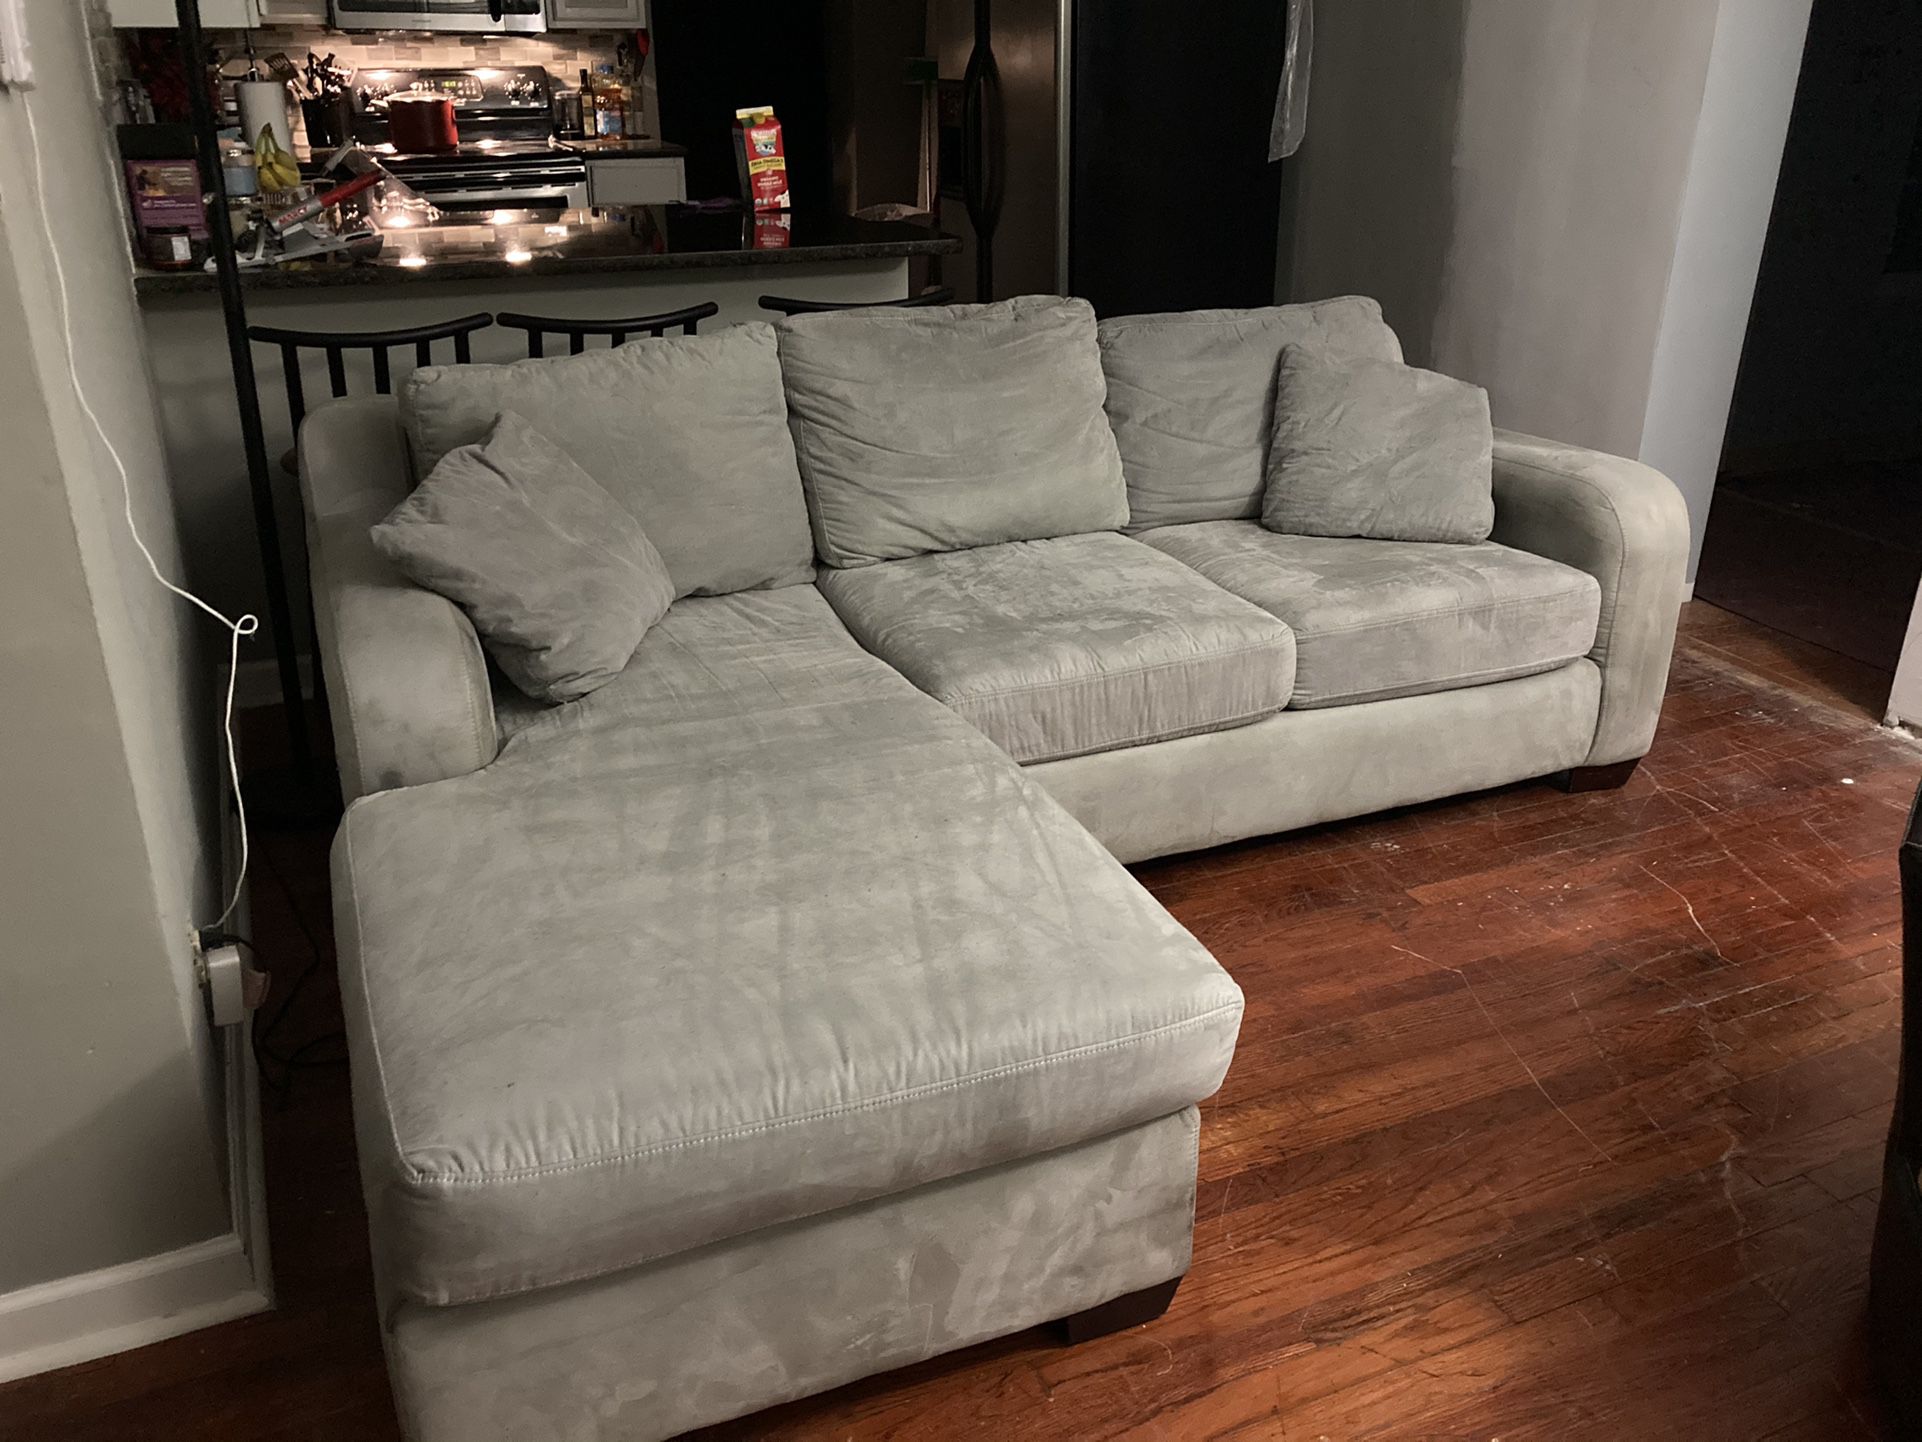 ROOMS TO GO MINT GREEN SECTIONAL $299 OBO...ALL OFFERS WELCOME!!!